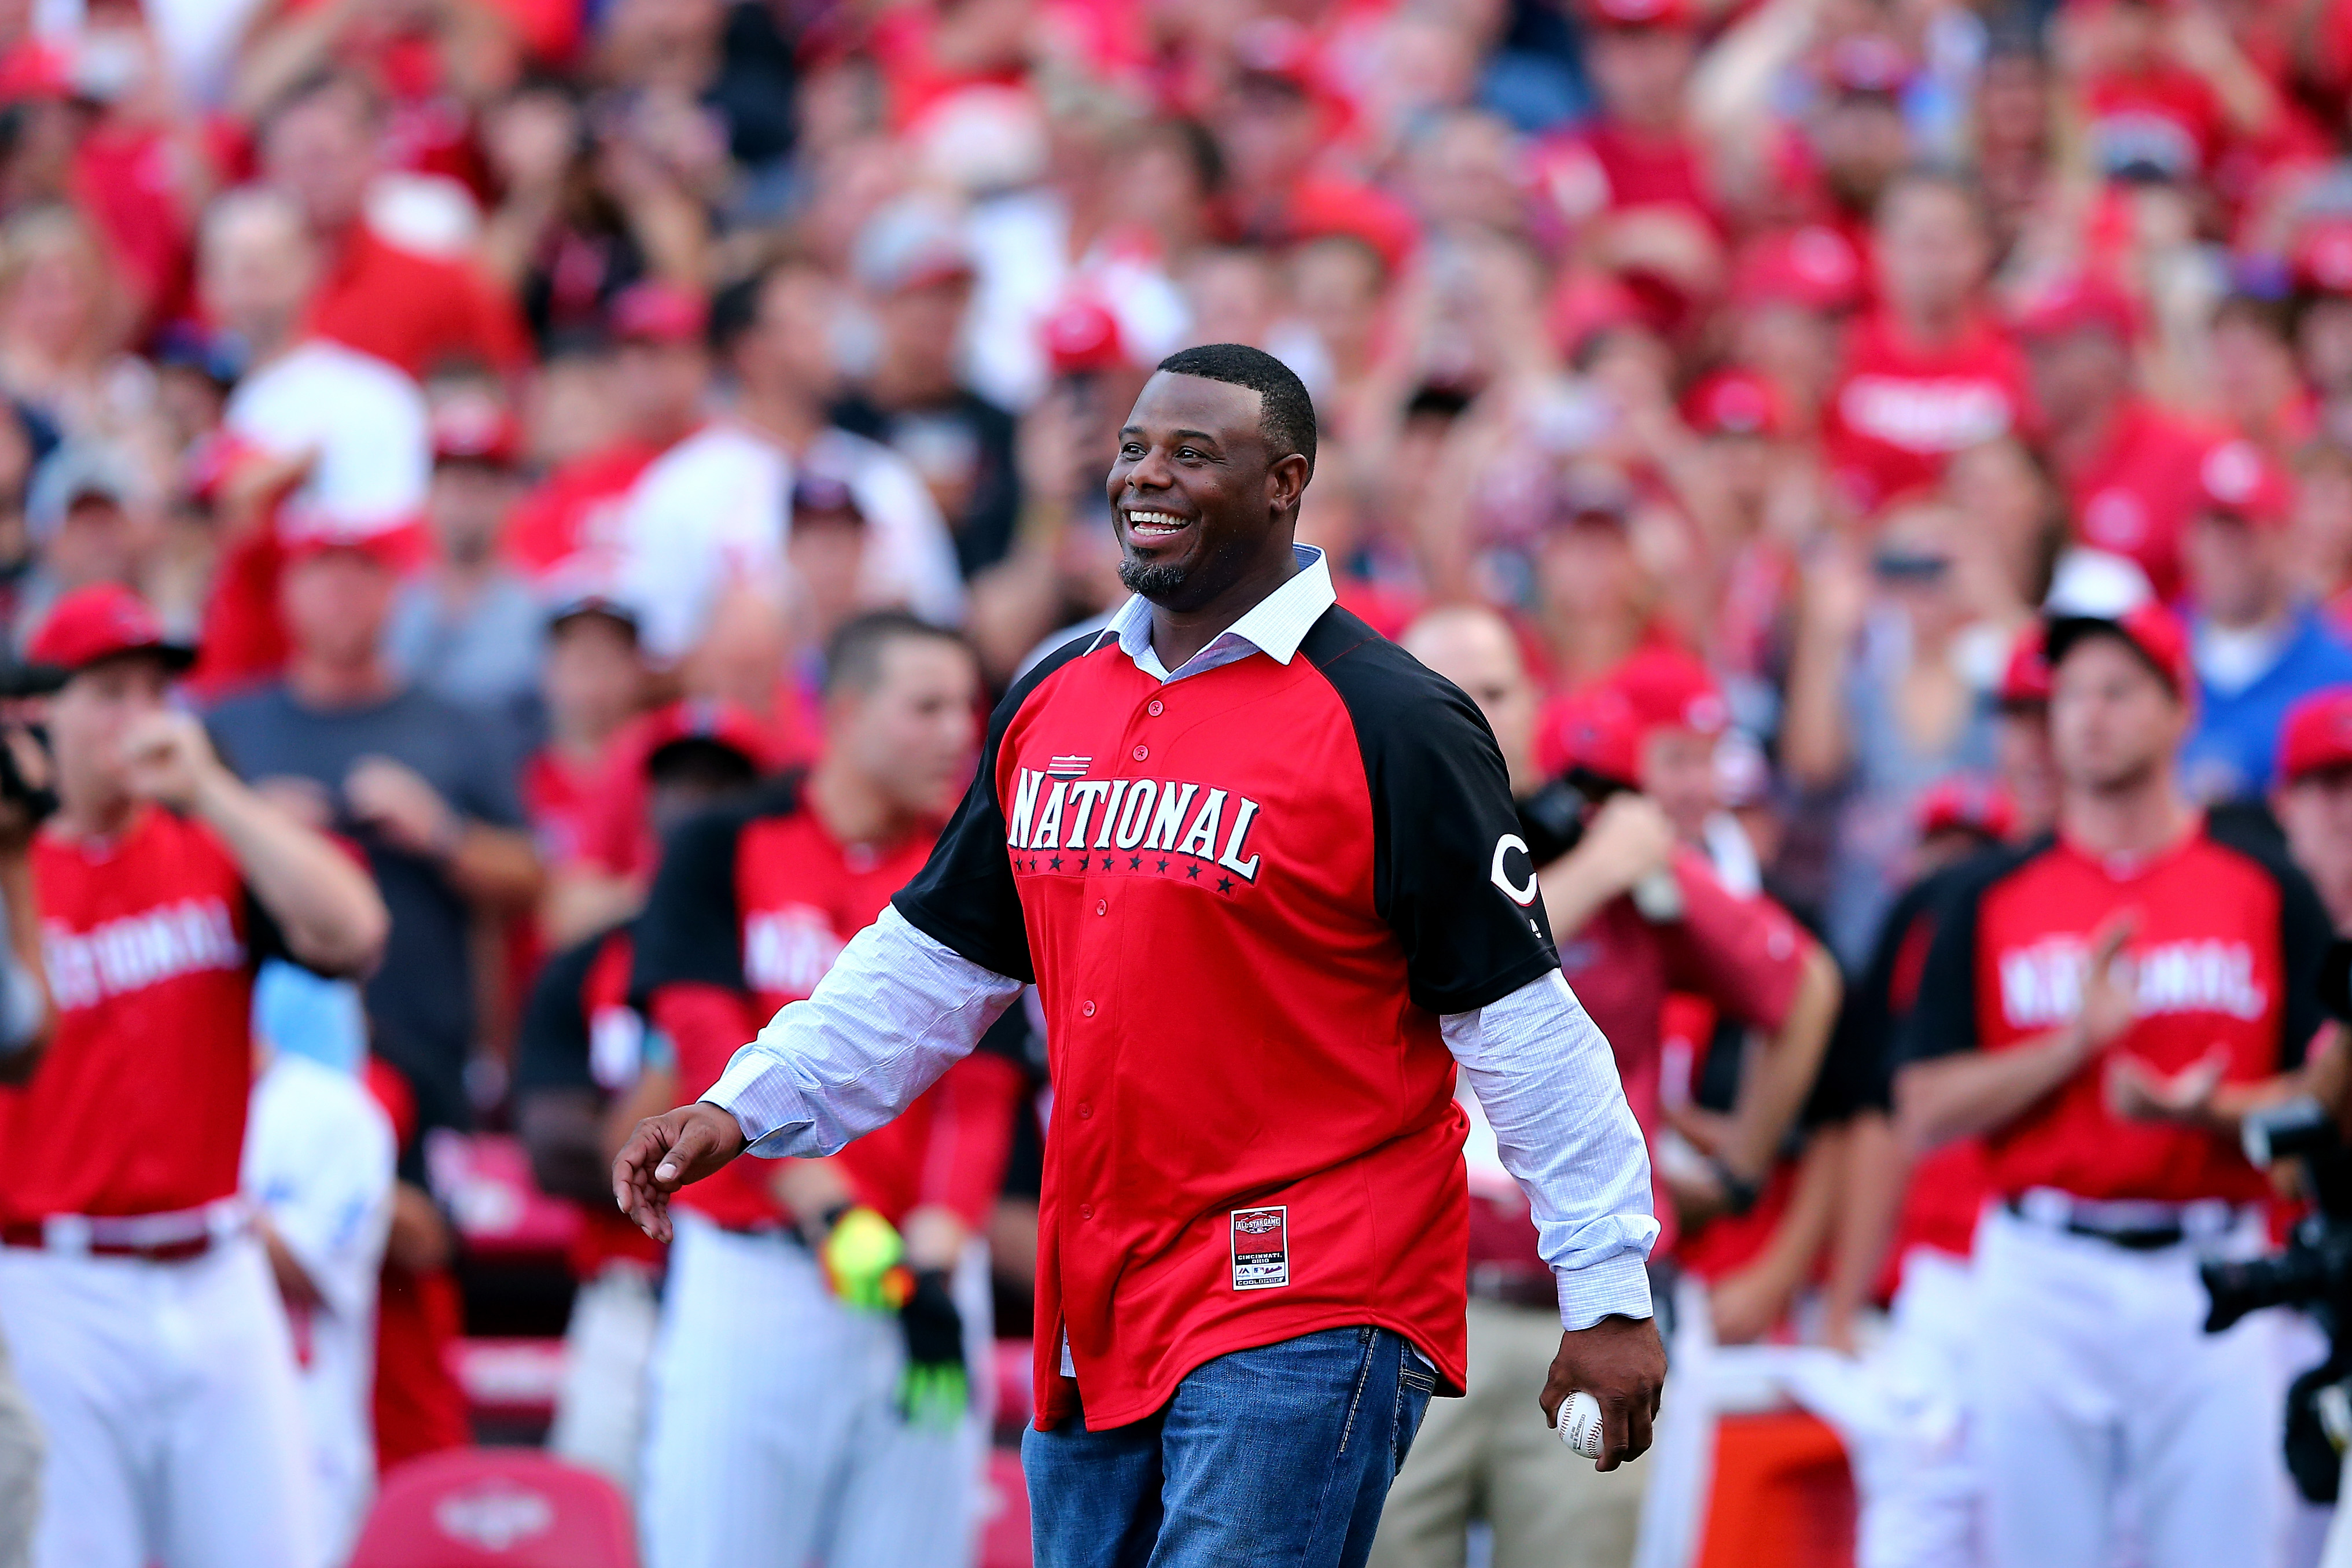 Ken Griffey Jr. walks out to throw the first pitch prior to the Gillette Home Run Derby presented by Head &amp; Shoulders at the Great American Ball Park in Cincinnati on July 13, 2015. (Elsa—Getty Images)